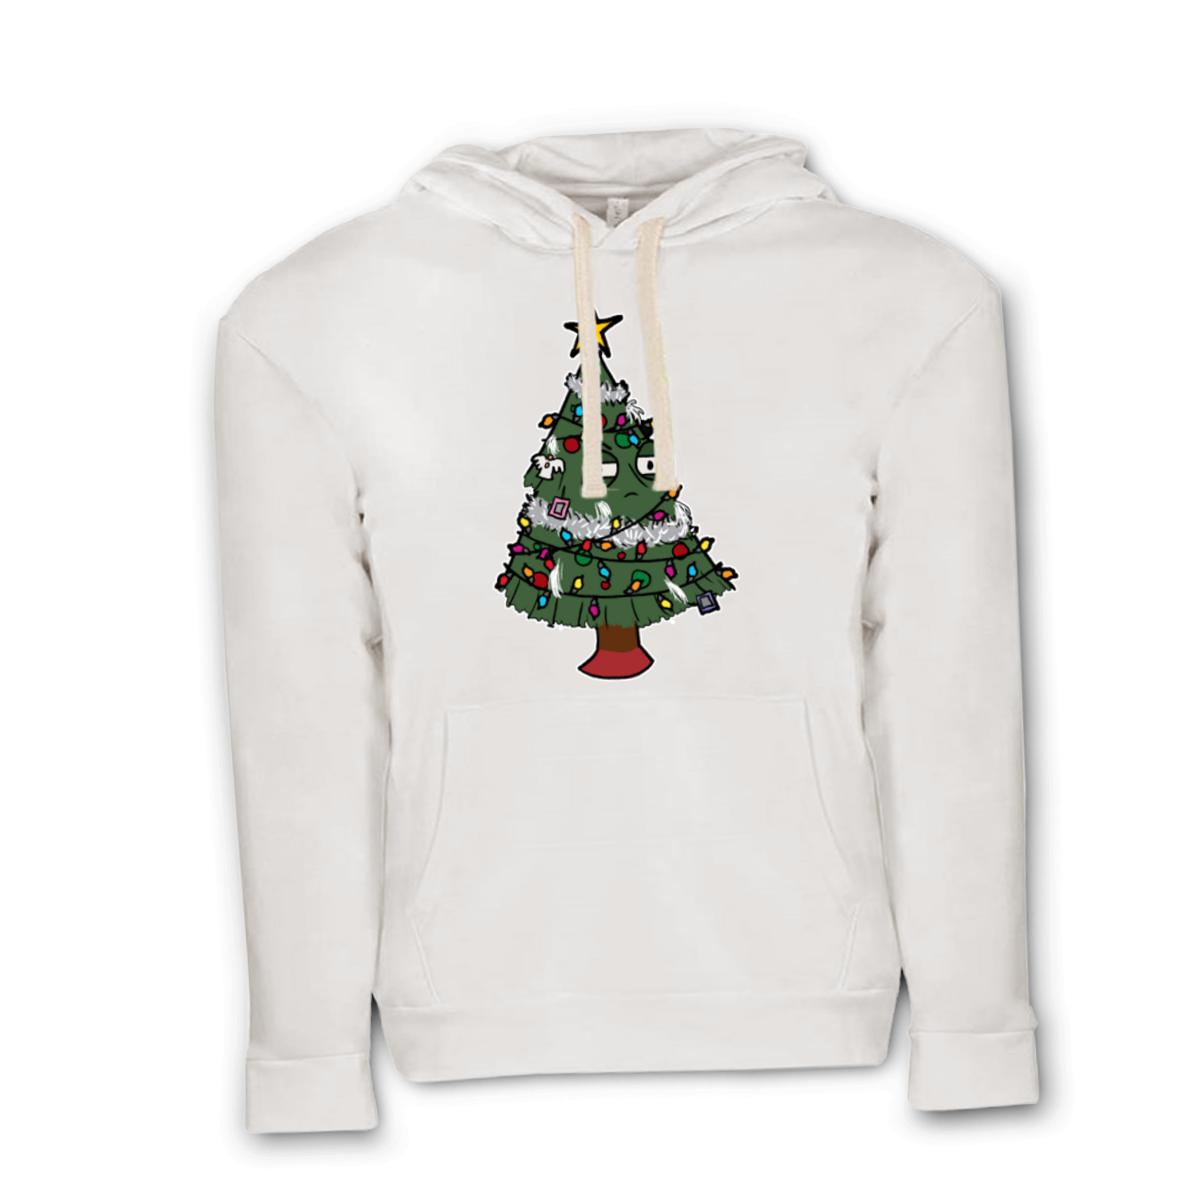 Gaudy Christmas Tree Unisex Pullover Hoodie Large white